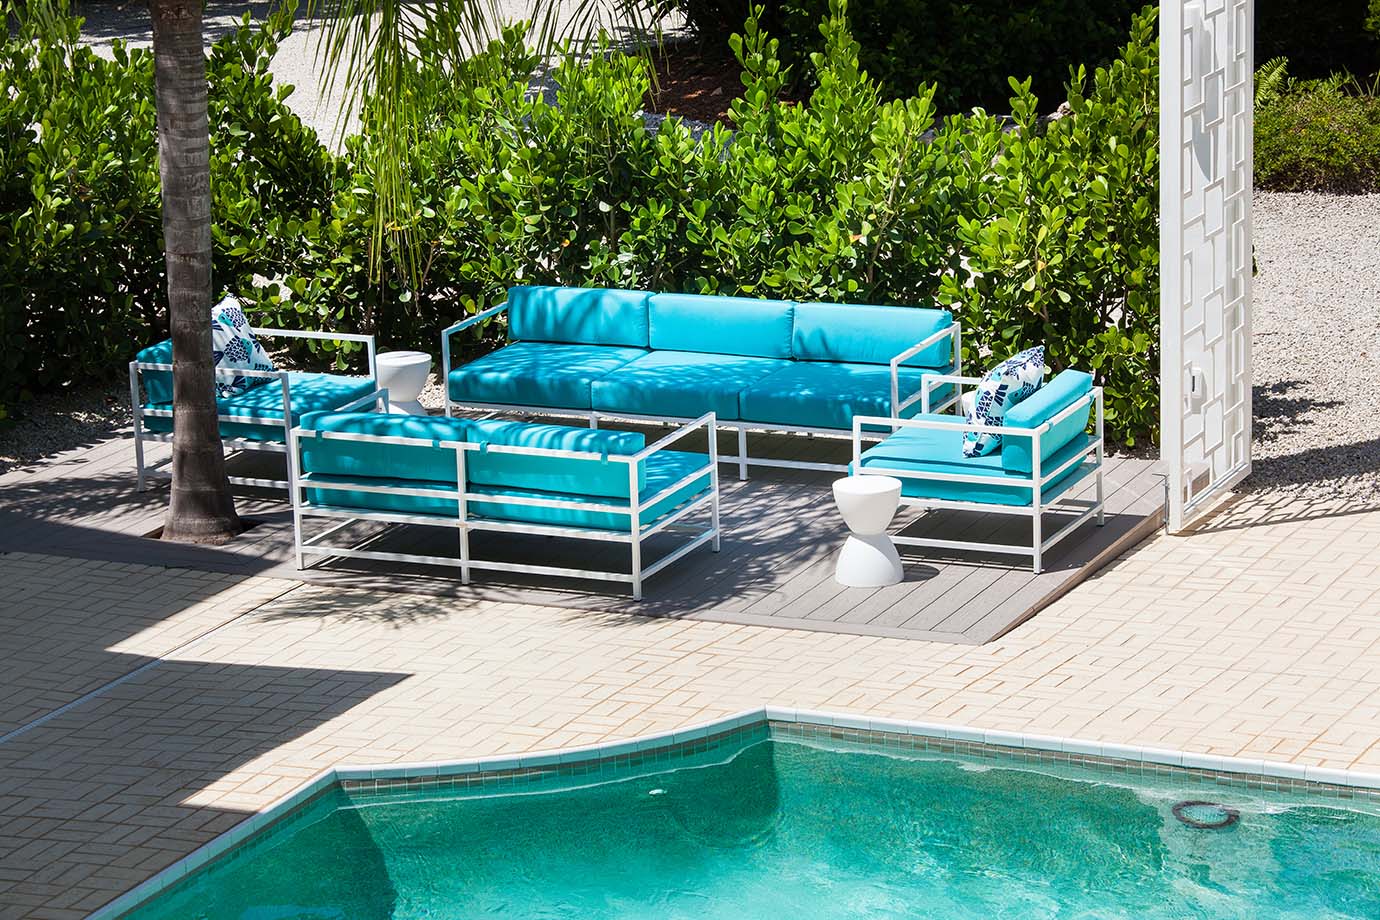 Bright blue inground pool with a blue and white lounge furniture set off the side surrounded by green bushes at the Sea Oats Estate in Captiva Island, FL